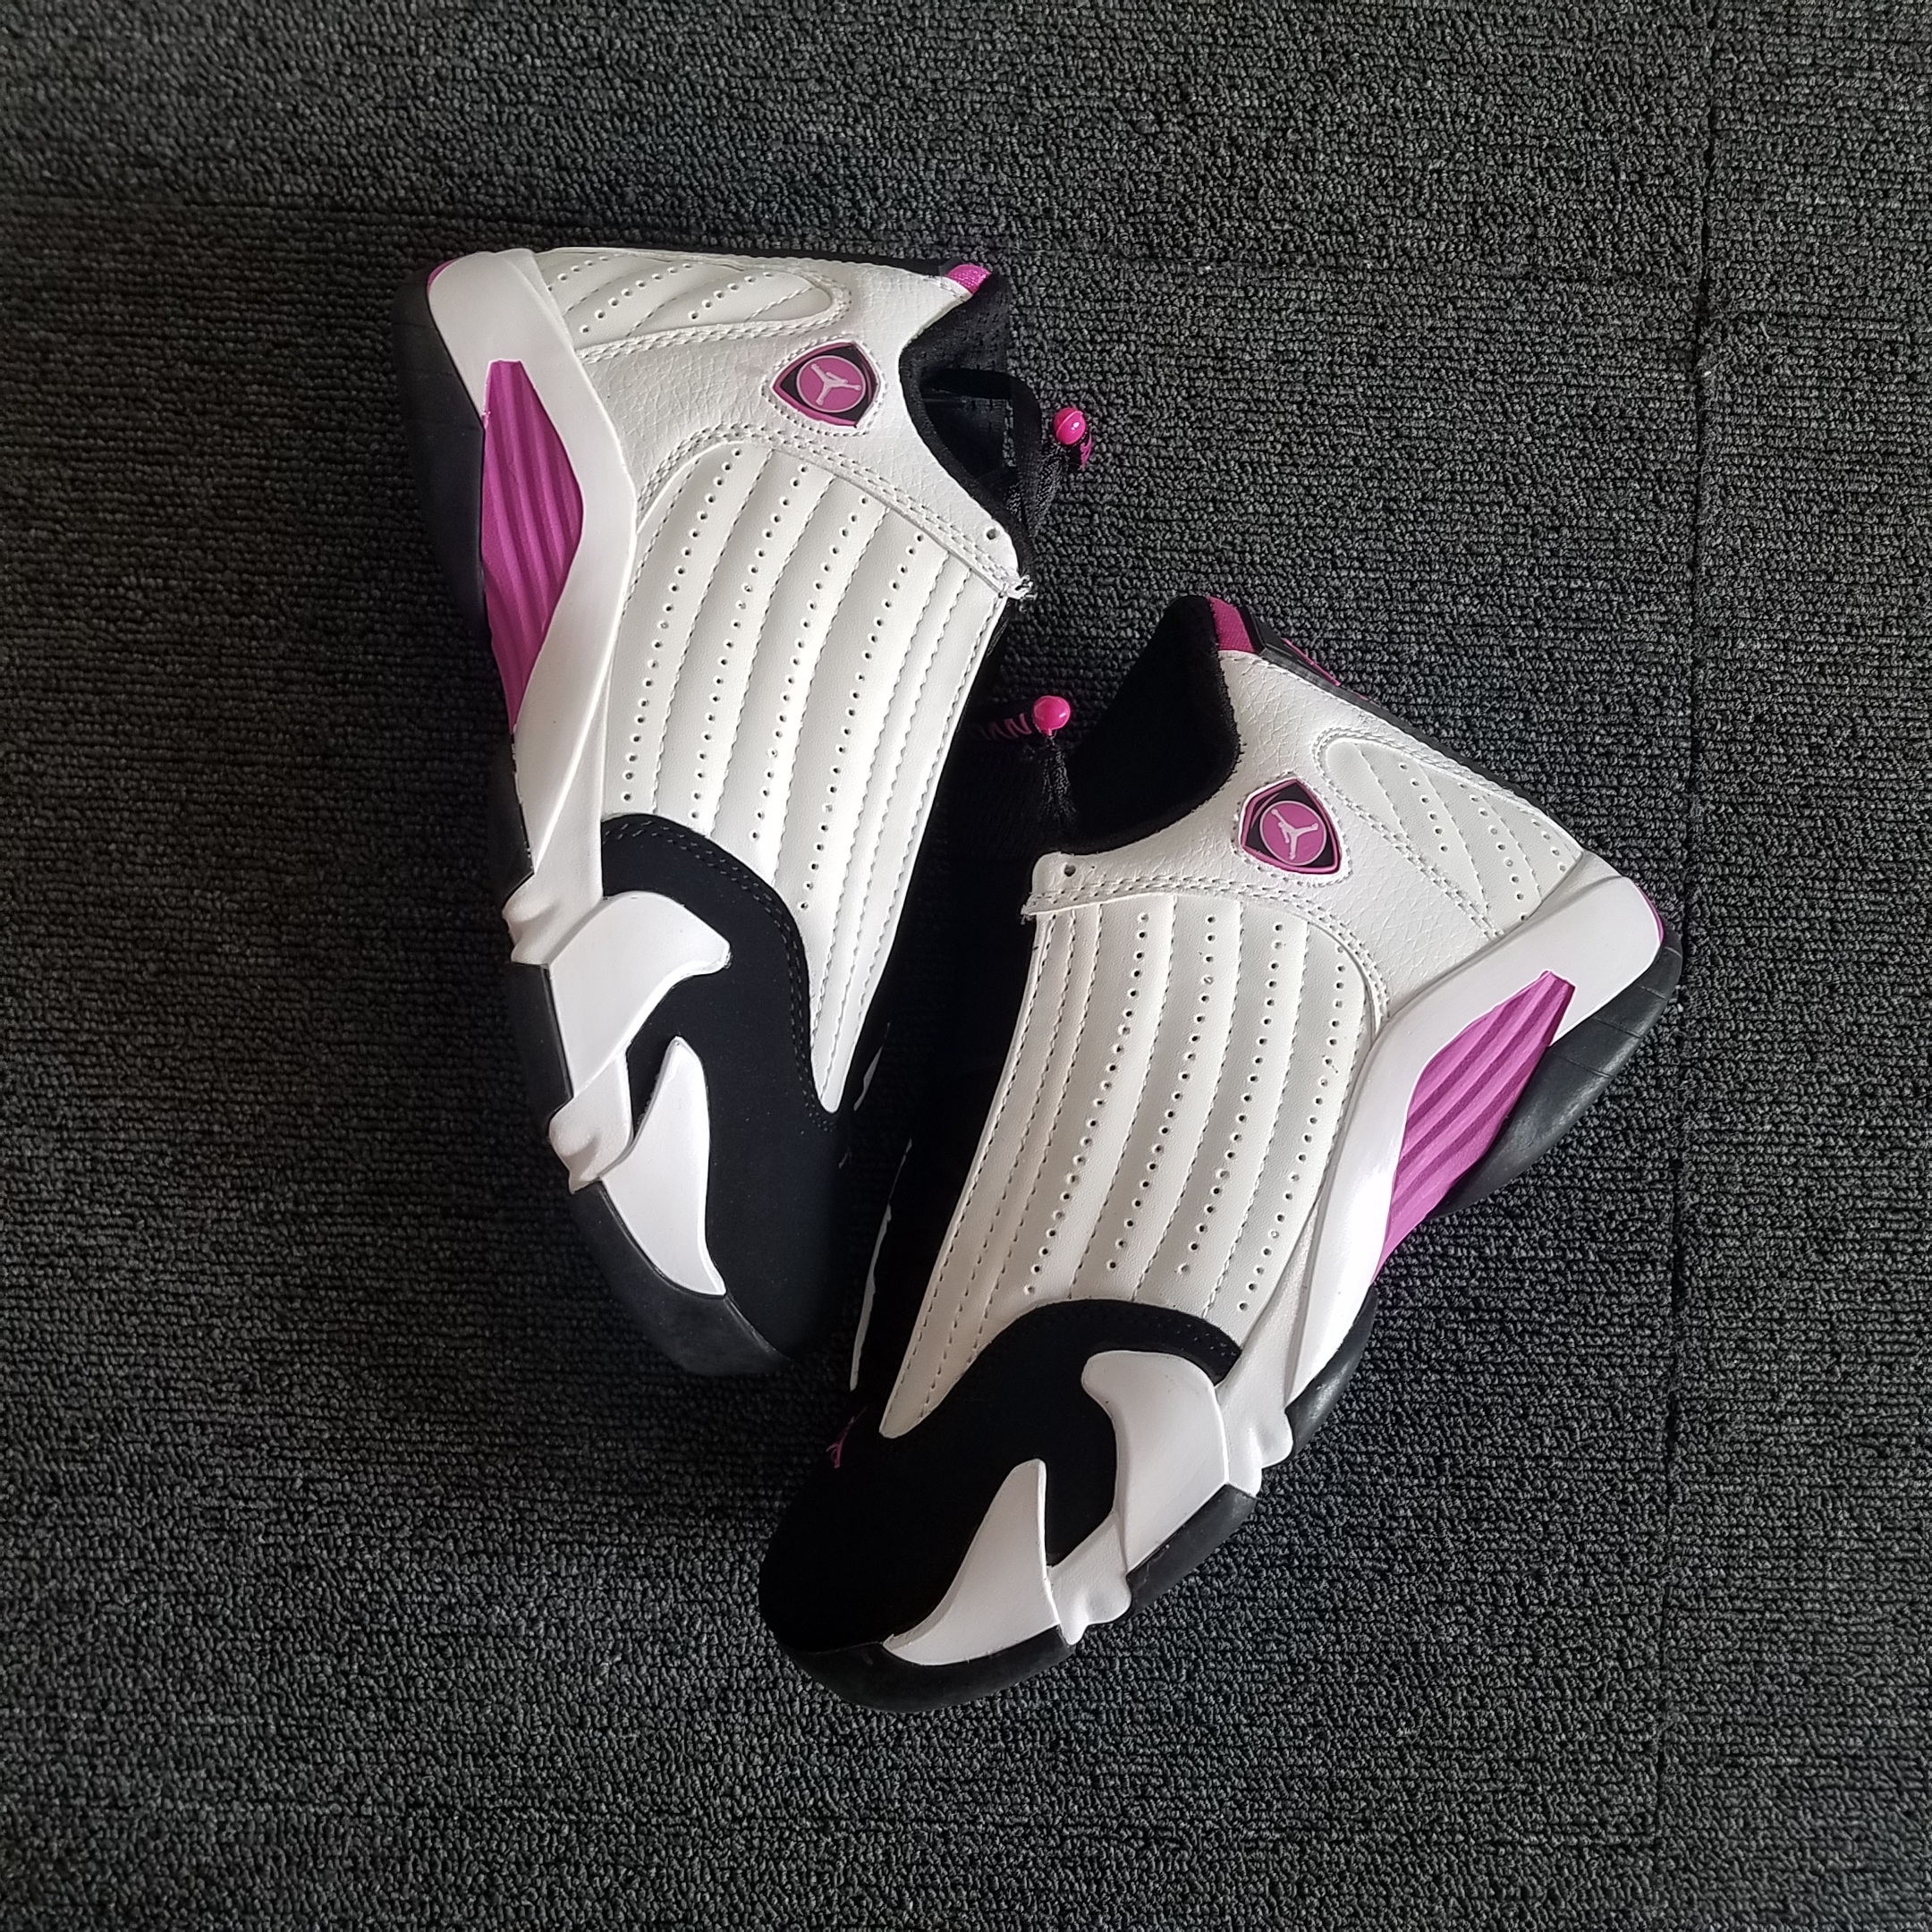 New Air Jordan 14 GS White Pink Shoes For Women